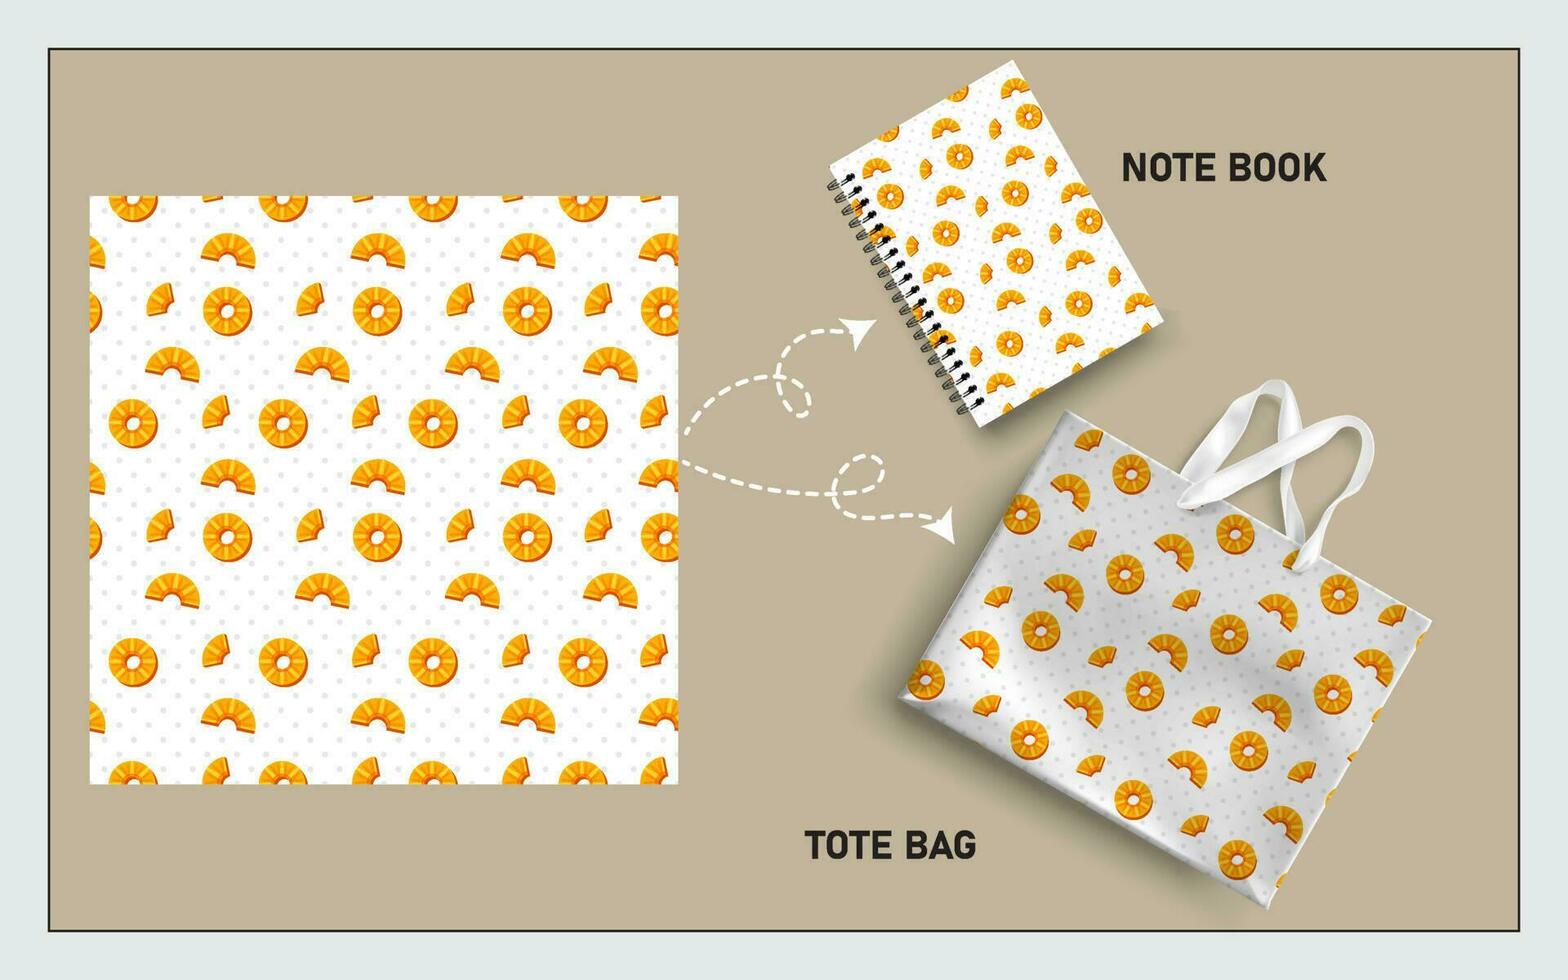 mockup tote bag and note book with pineapple fruits, leaf seamless pattern. vector